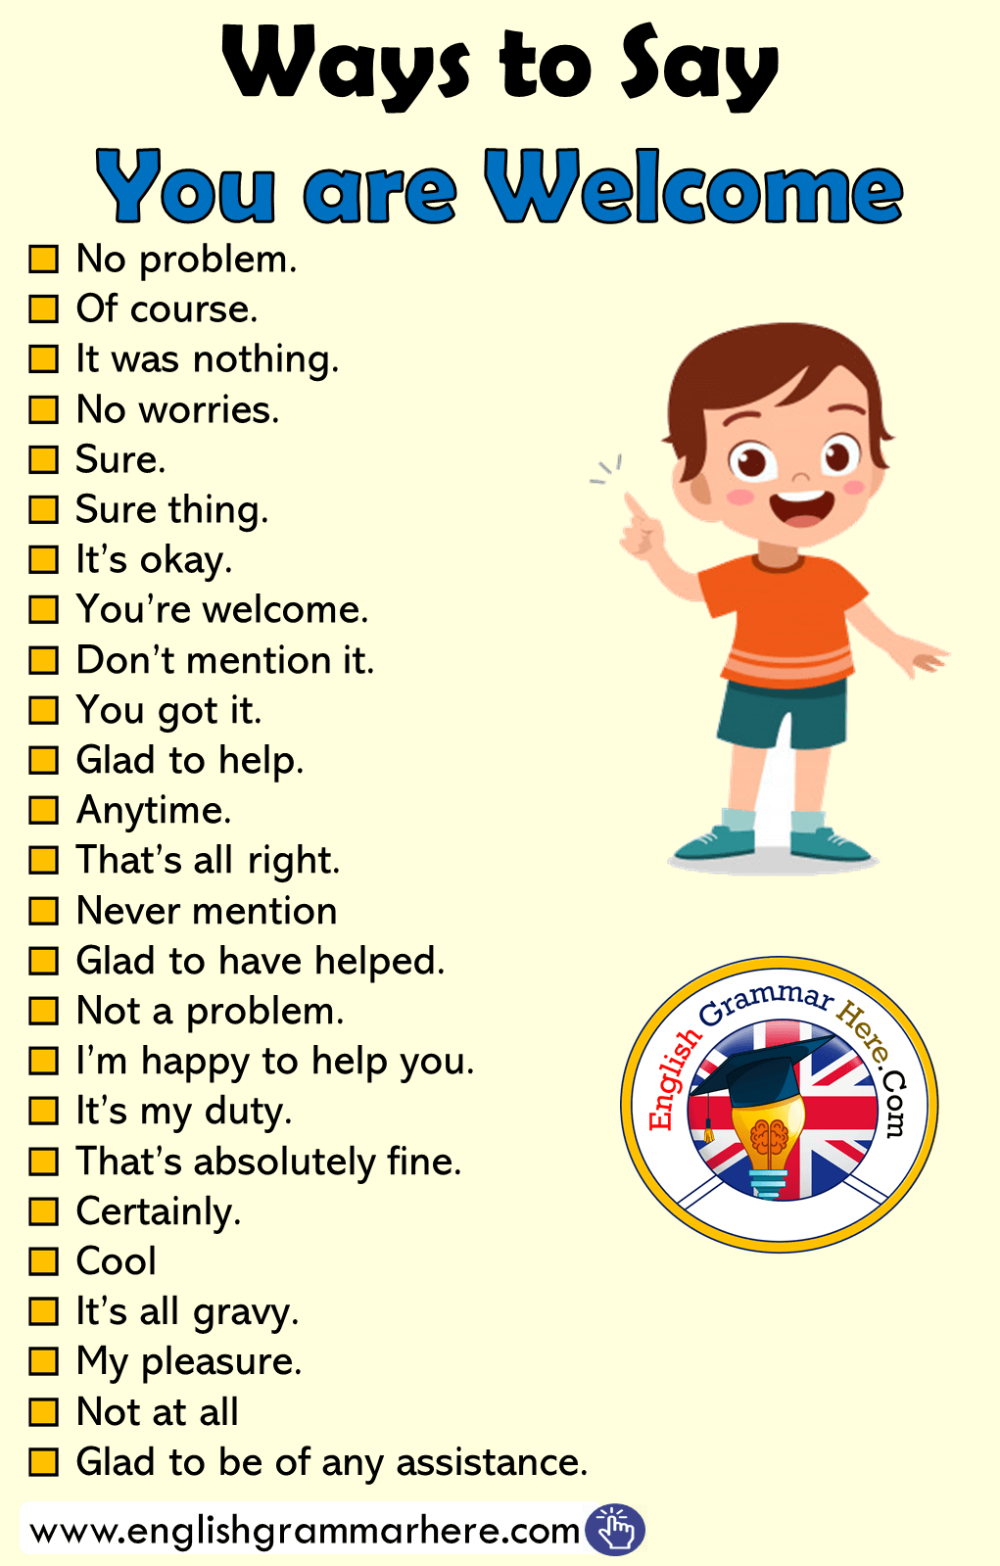 English Ways to Say You are Welcome